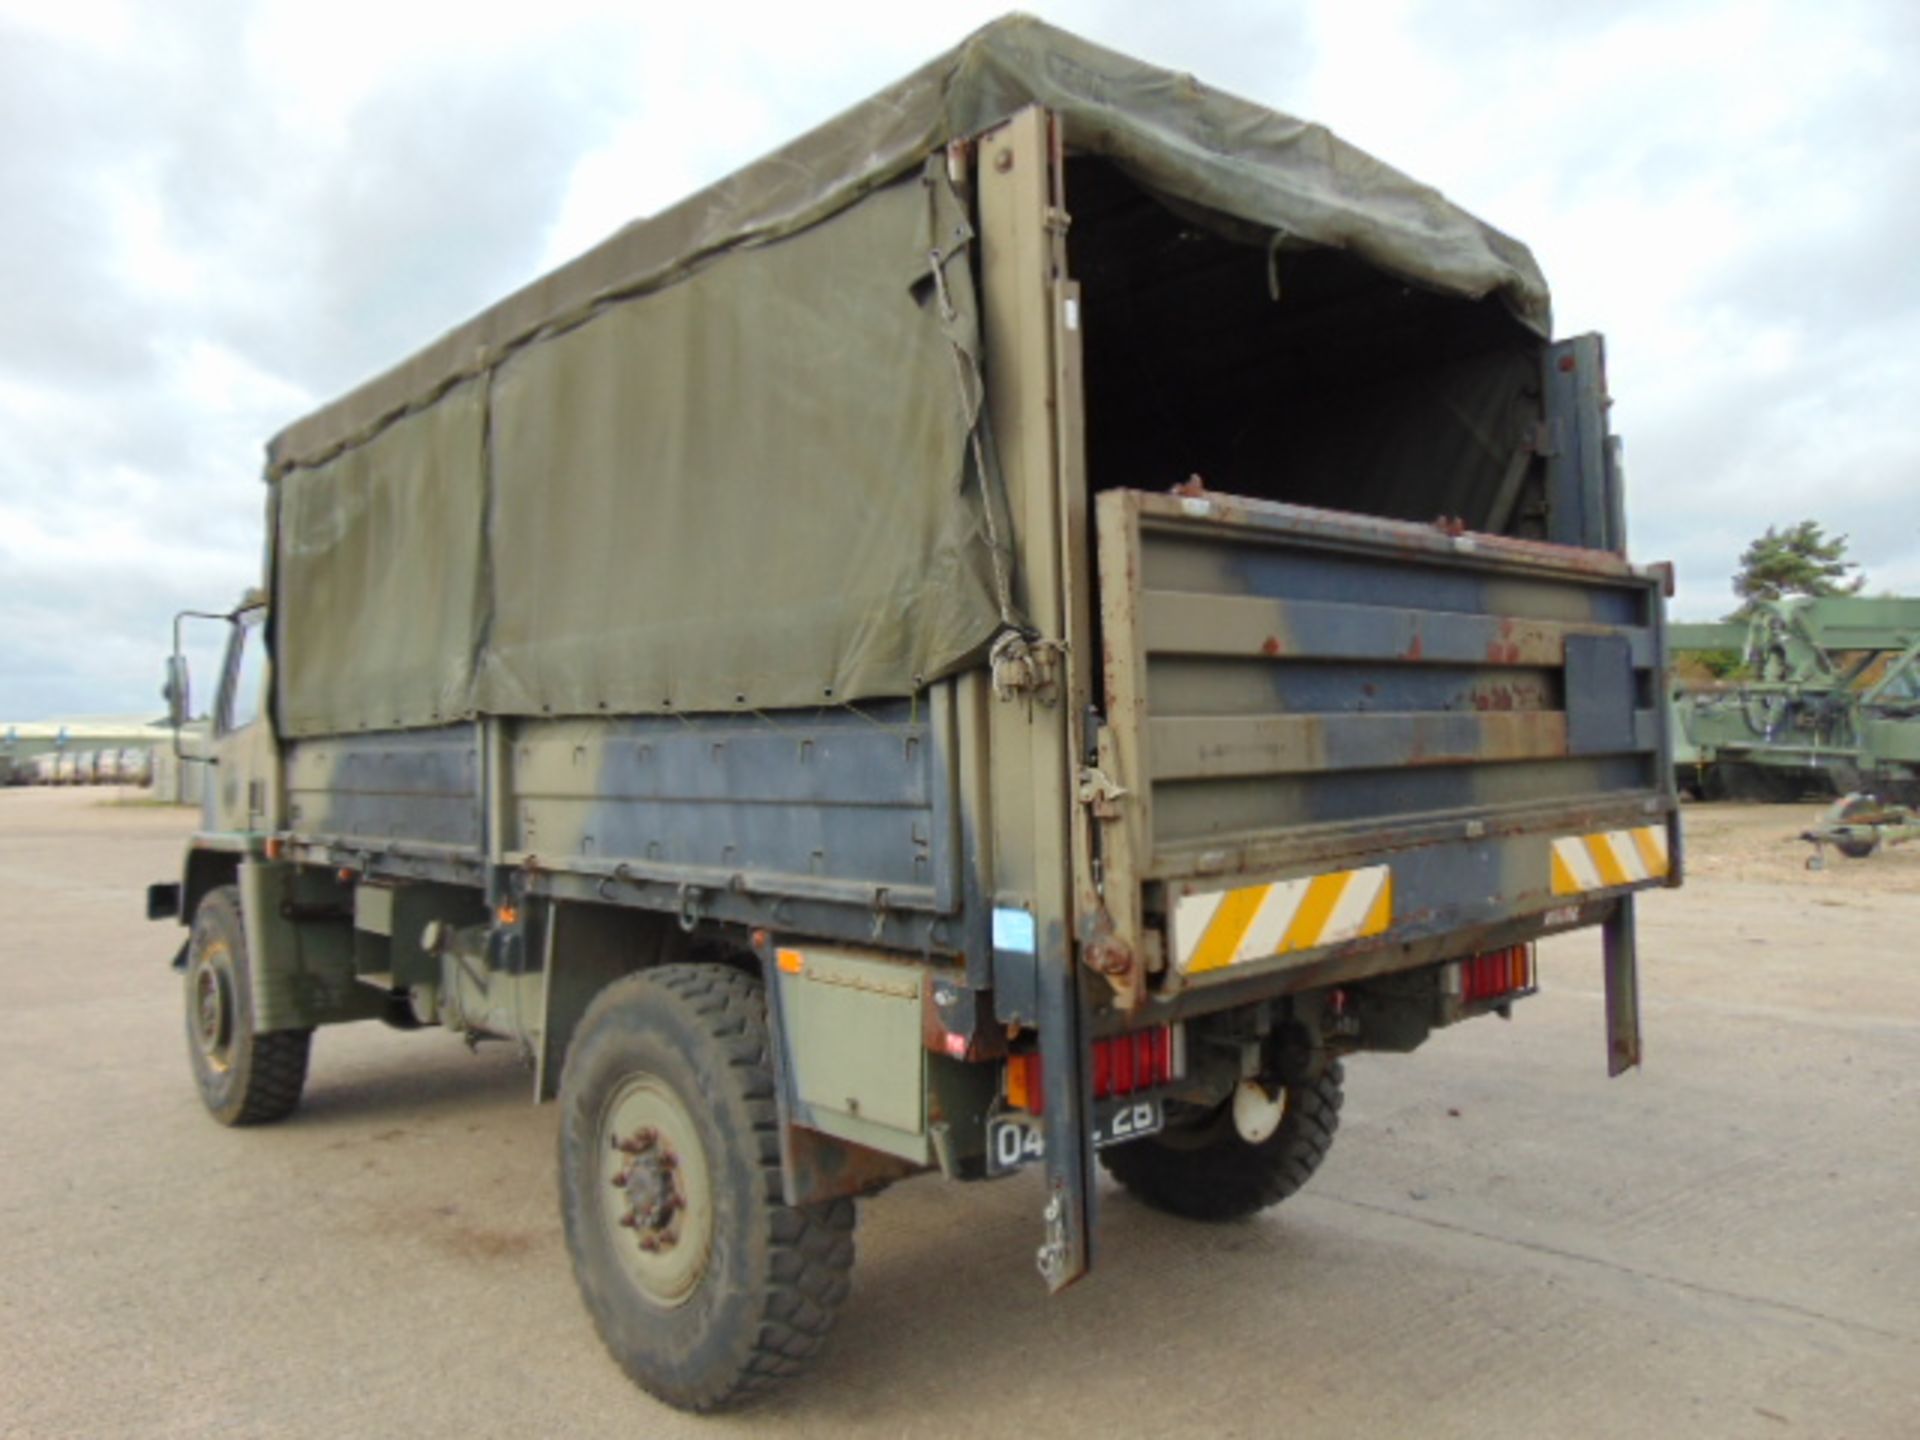 Leyland Daf 45/150 4 x 4 with Ratcliff 1000Kg Tail Lift - Image 8 of 16